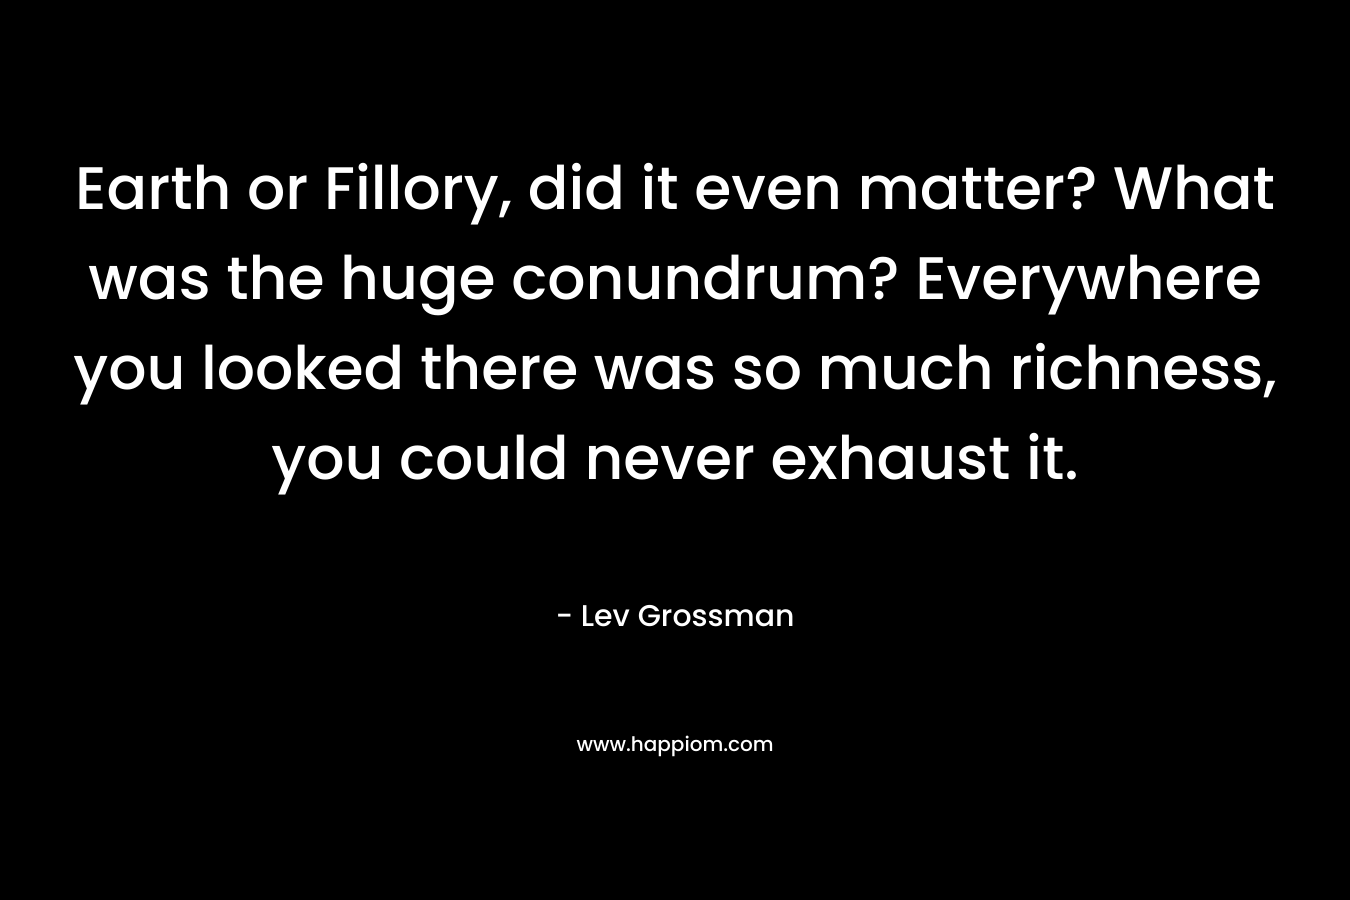 Earth or Fillory, did it even matter? What was the huge conundrum? Everywhere you looked there was so much richness, you could never exhaust it. – Lev Grossman